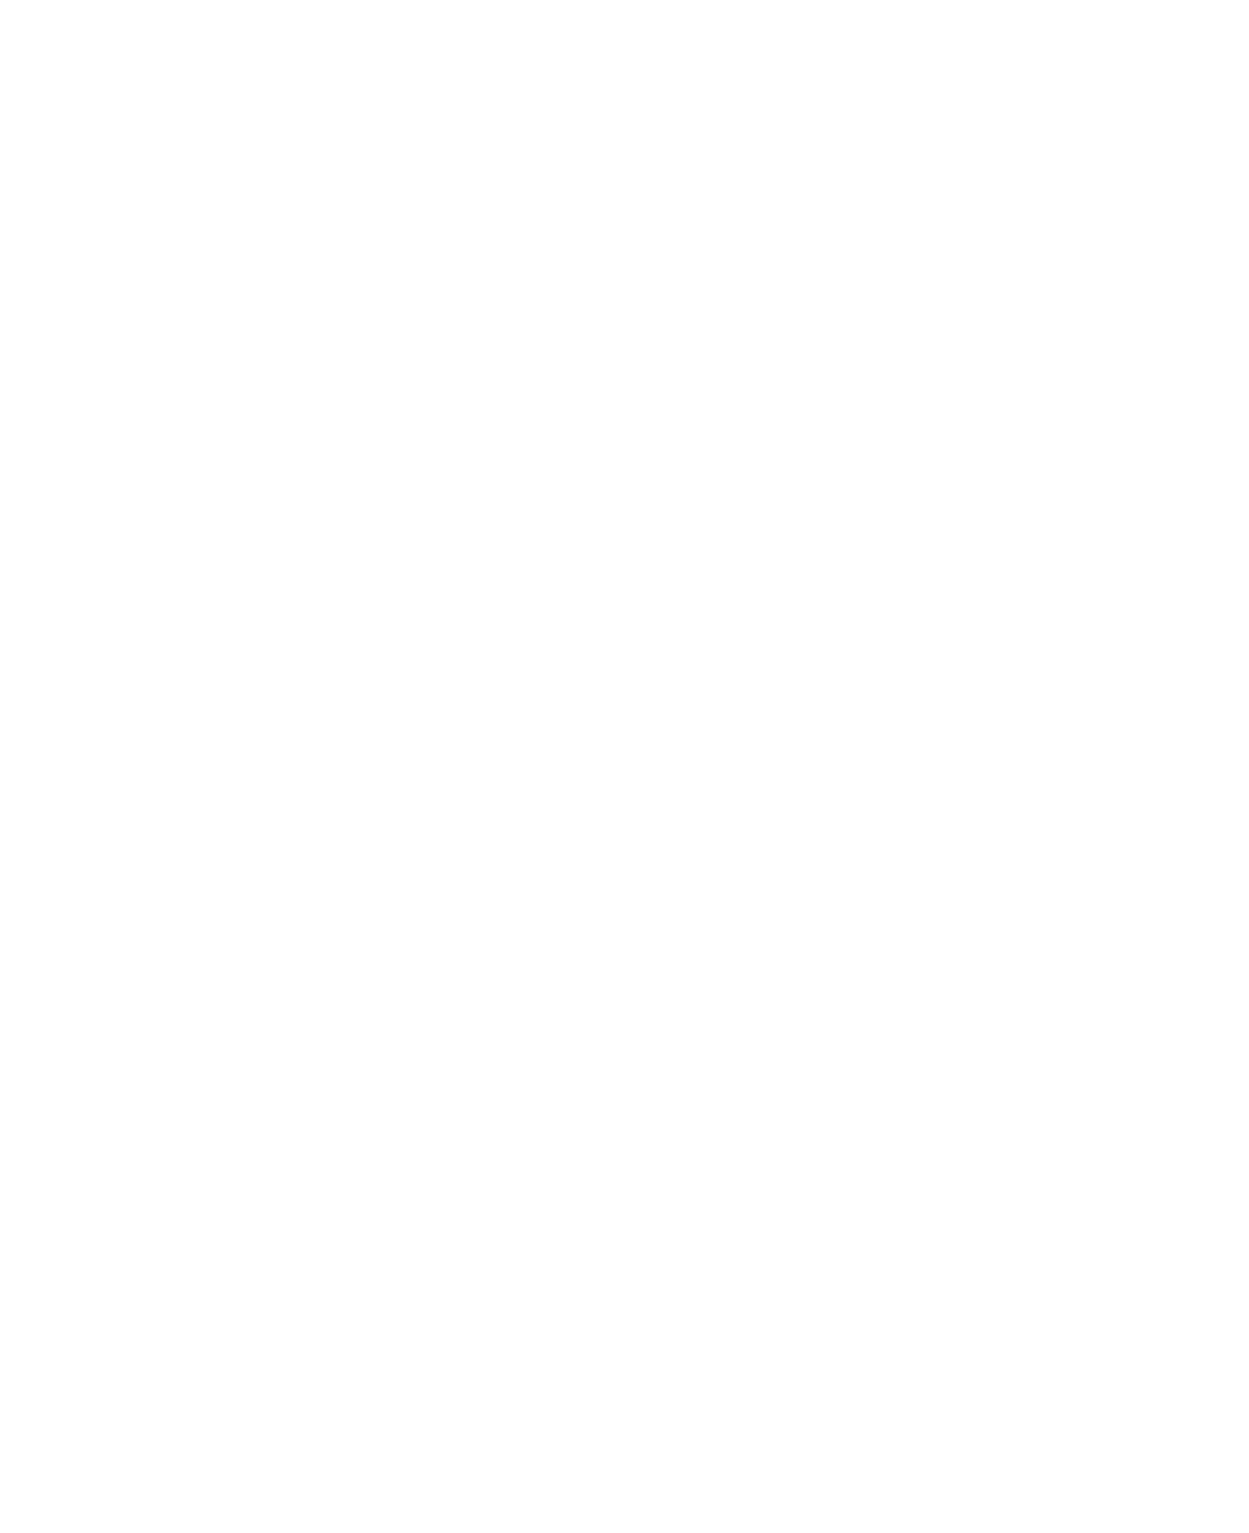 Rigetti Computing logo for dark backgrounds (transparent PNG)